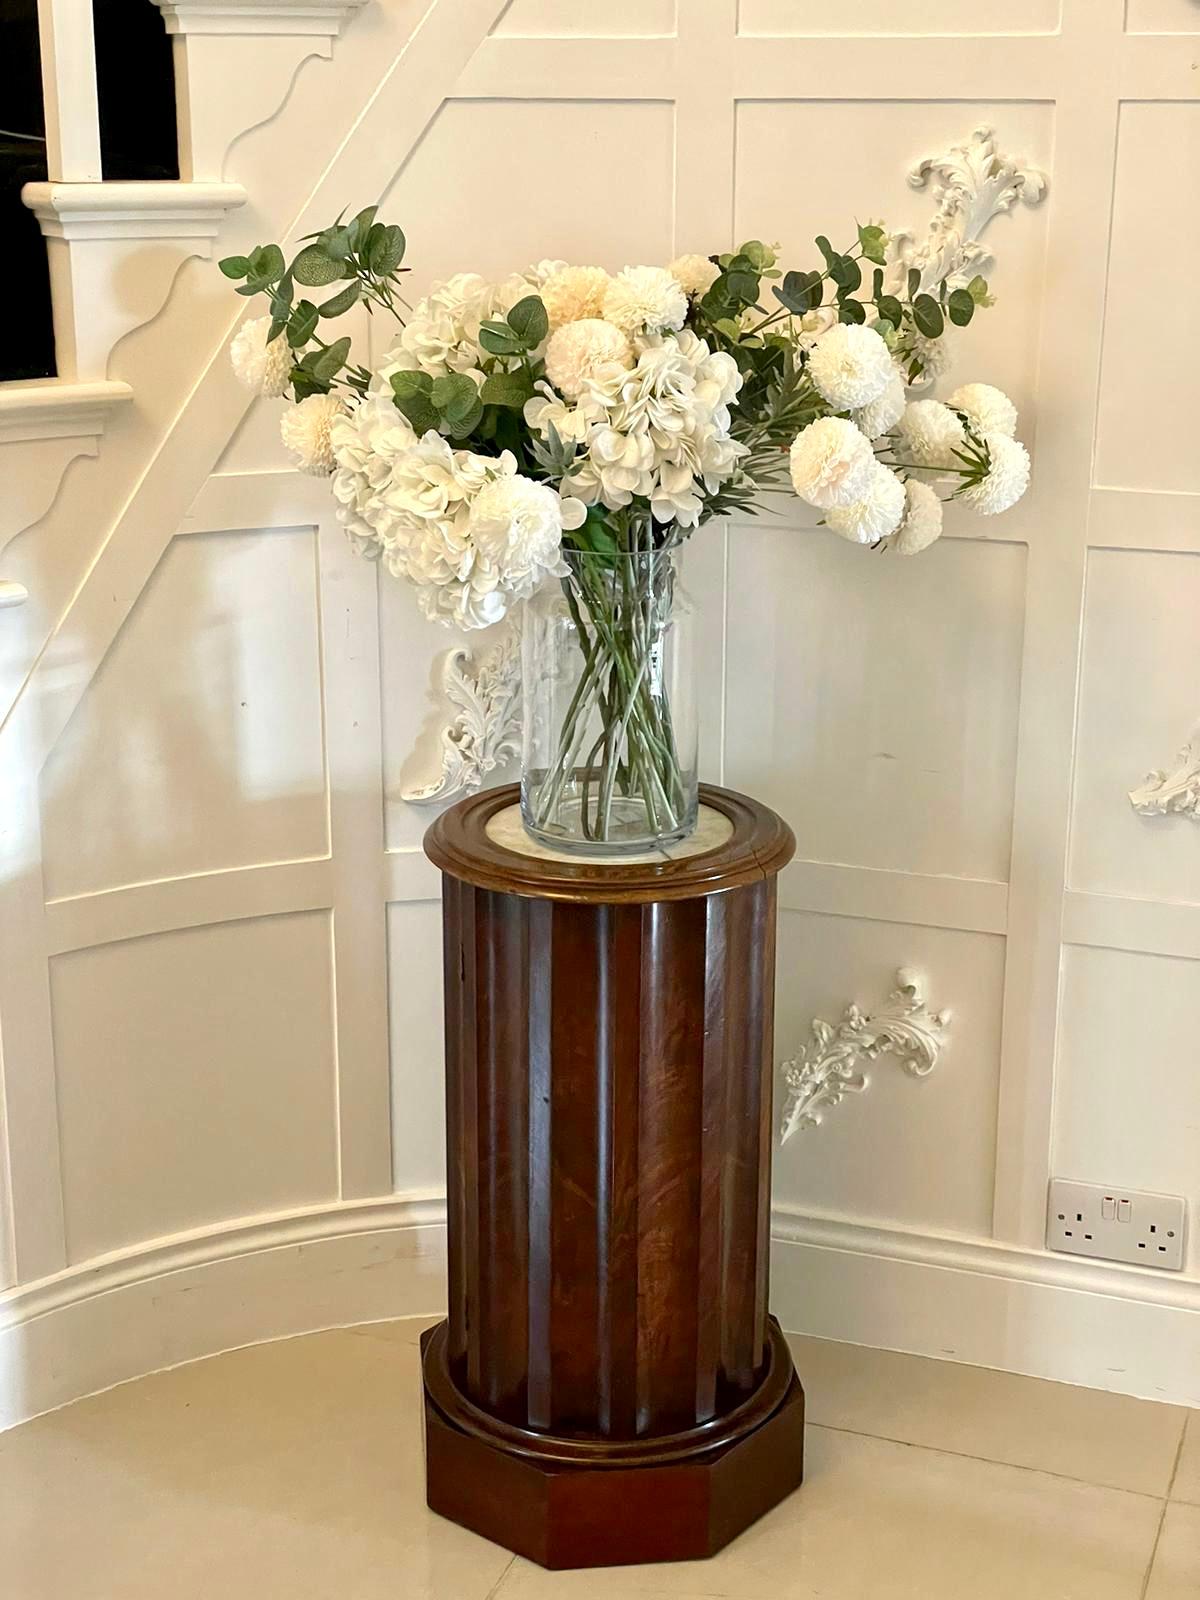 Antique Victorian quality mahogany pedestal cabinet having a circular white marble top with a mahogany frieze above a shaped fluted figured mahogany pedestal with a single door opening to reveal a shelf interior and standing on an attractive